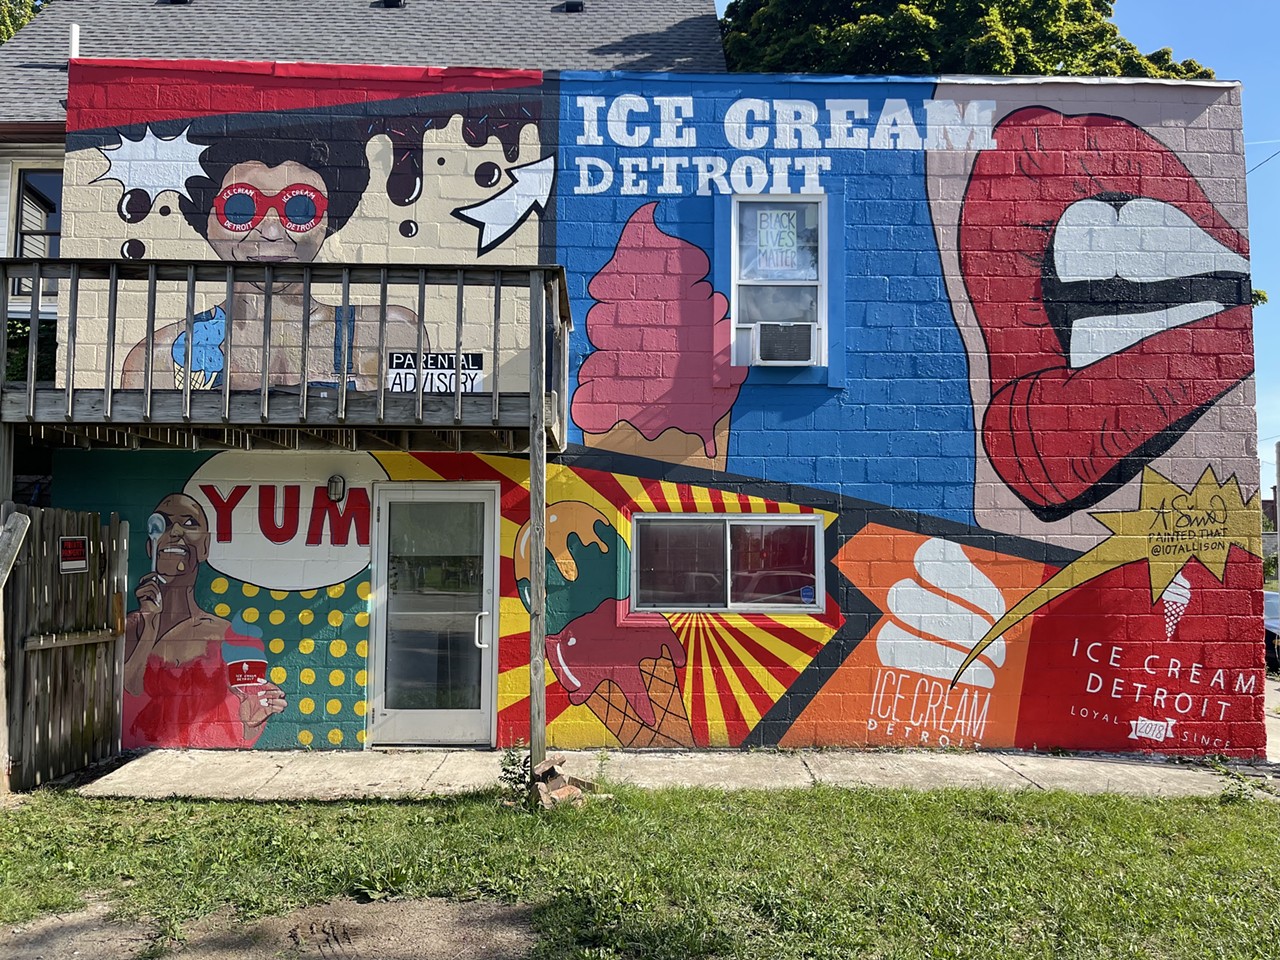 Ice Cream Detroit
3762 2nd Ave., Detroit;  instagram.com/theicecreamdetroit
This liquor-infused ice cream and sorbet shop has faced several delays. Expected to finally open in the fall, now its social media accounts say spring 2024. Hopefully, it’s true this time.
Read more here.